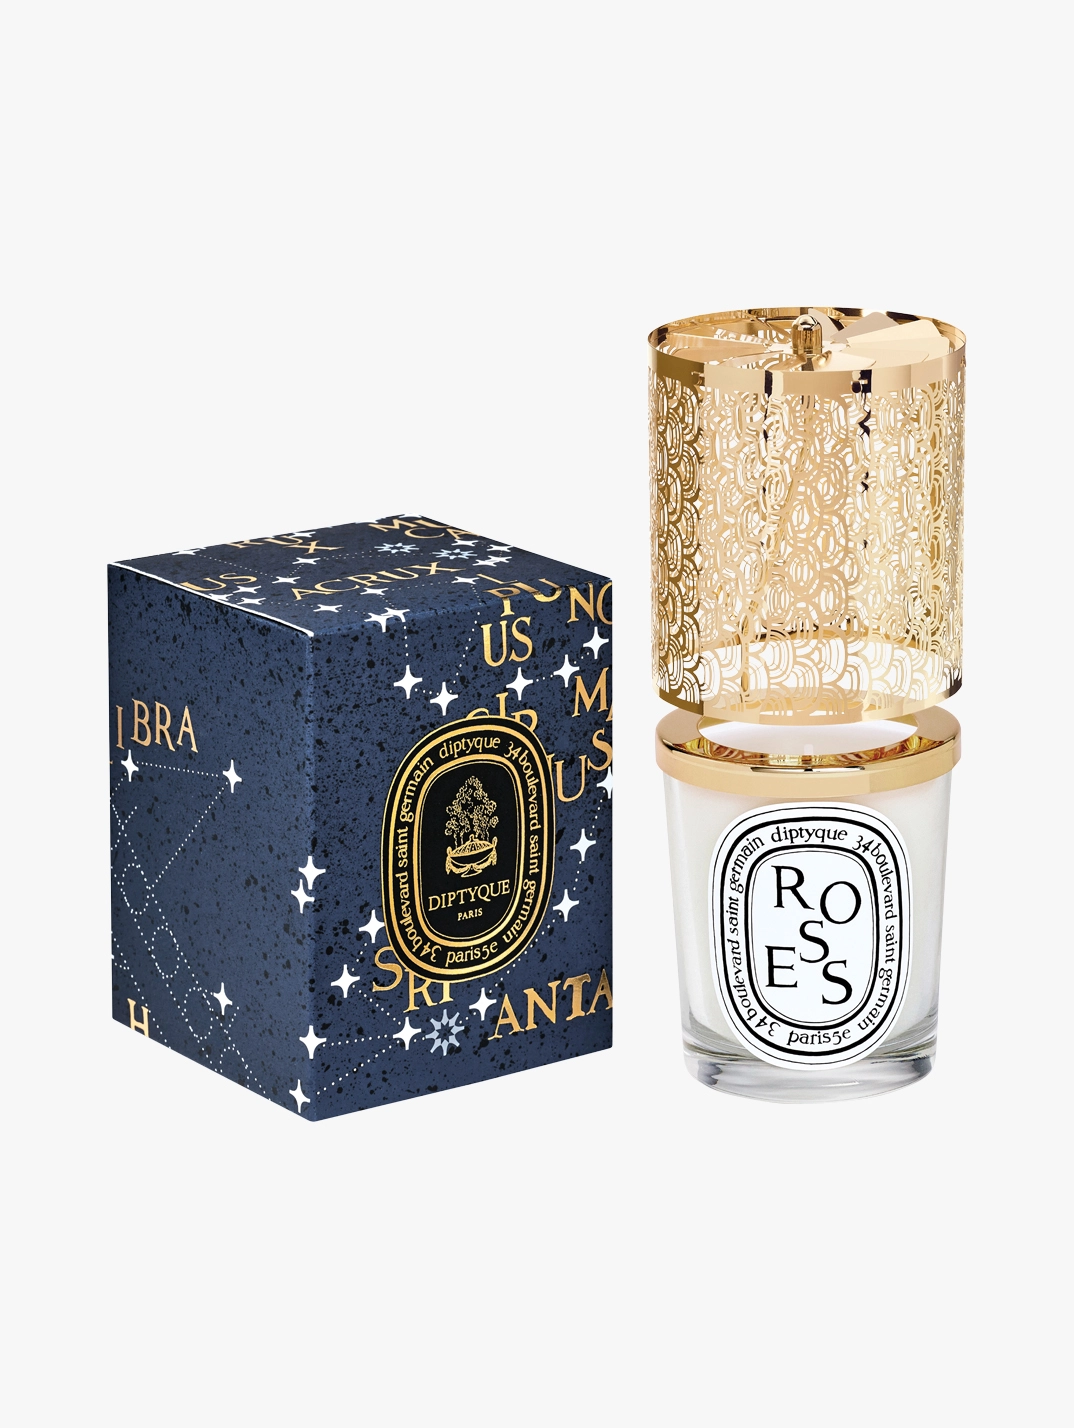 Lantern For 190g Candle - diptyque | MECCA